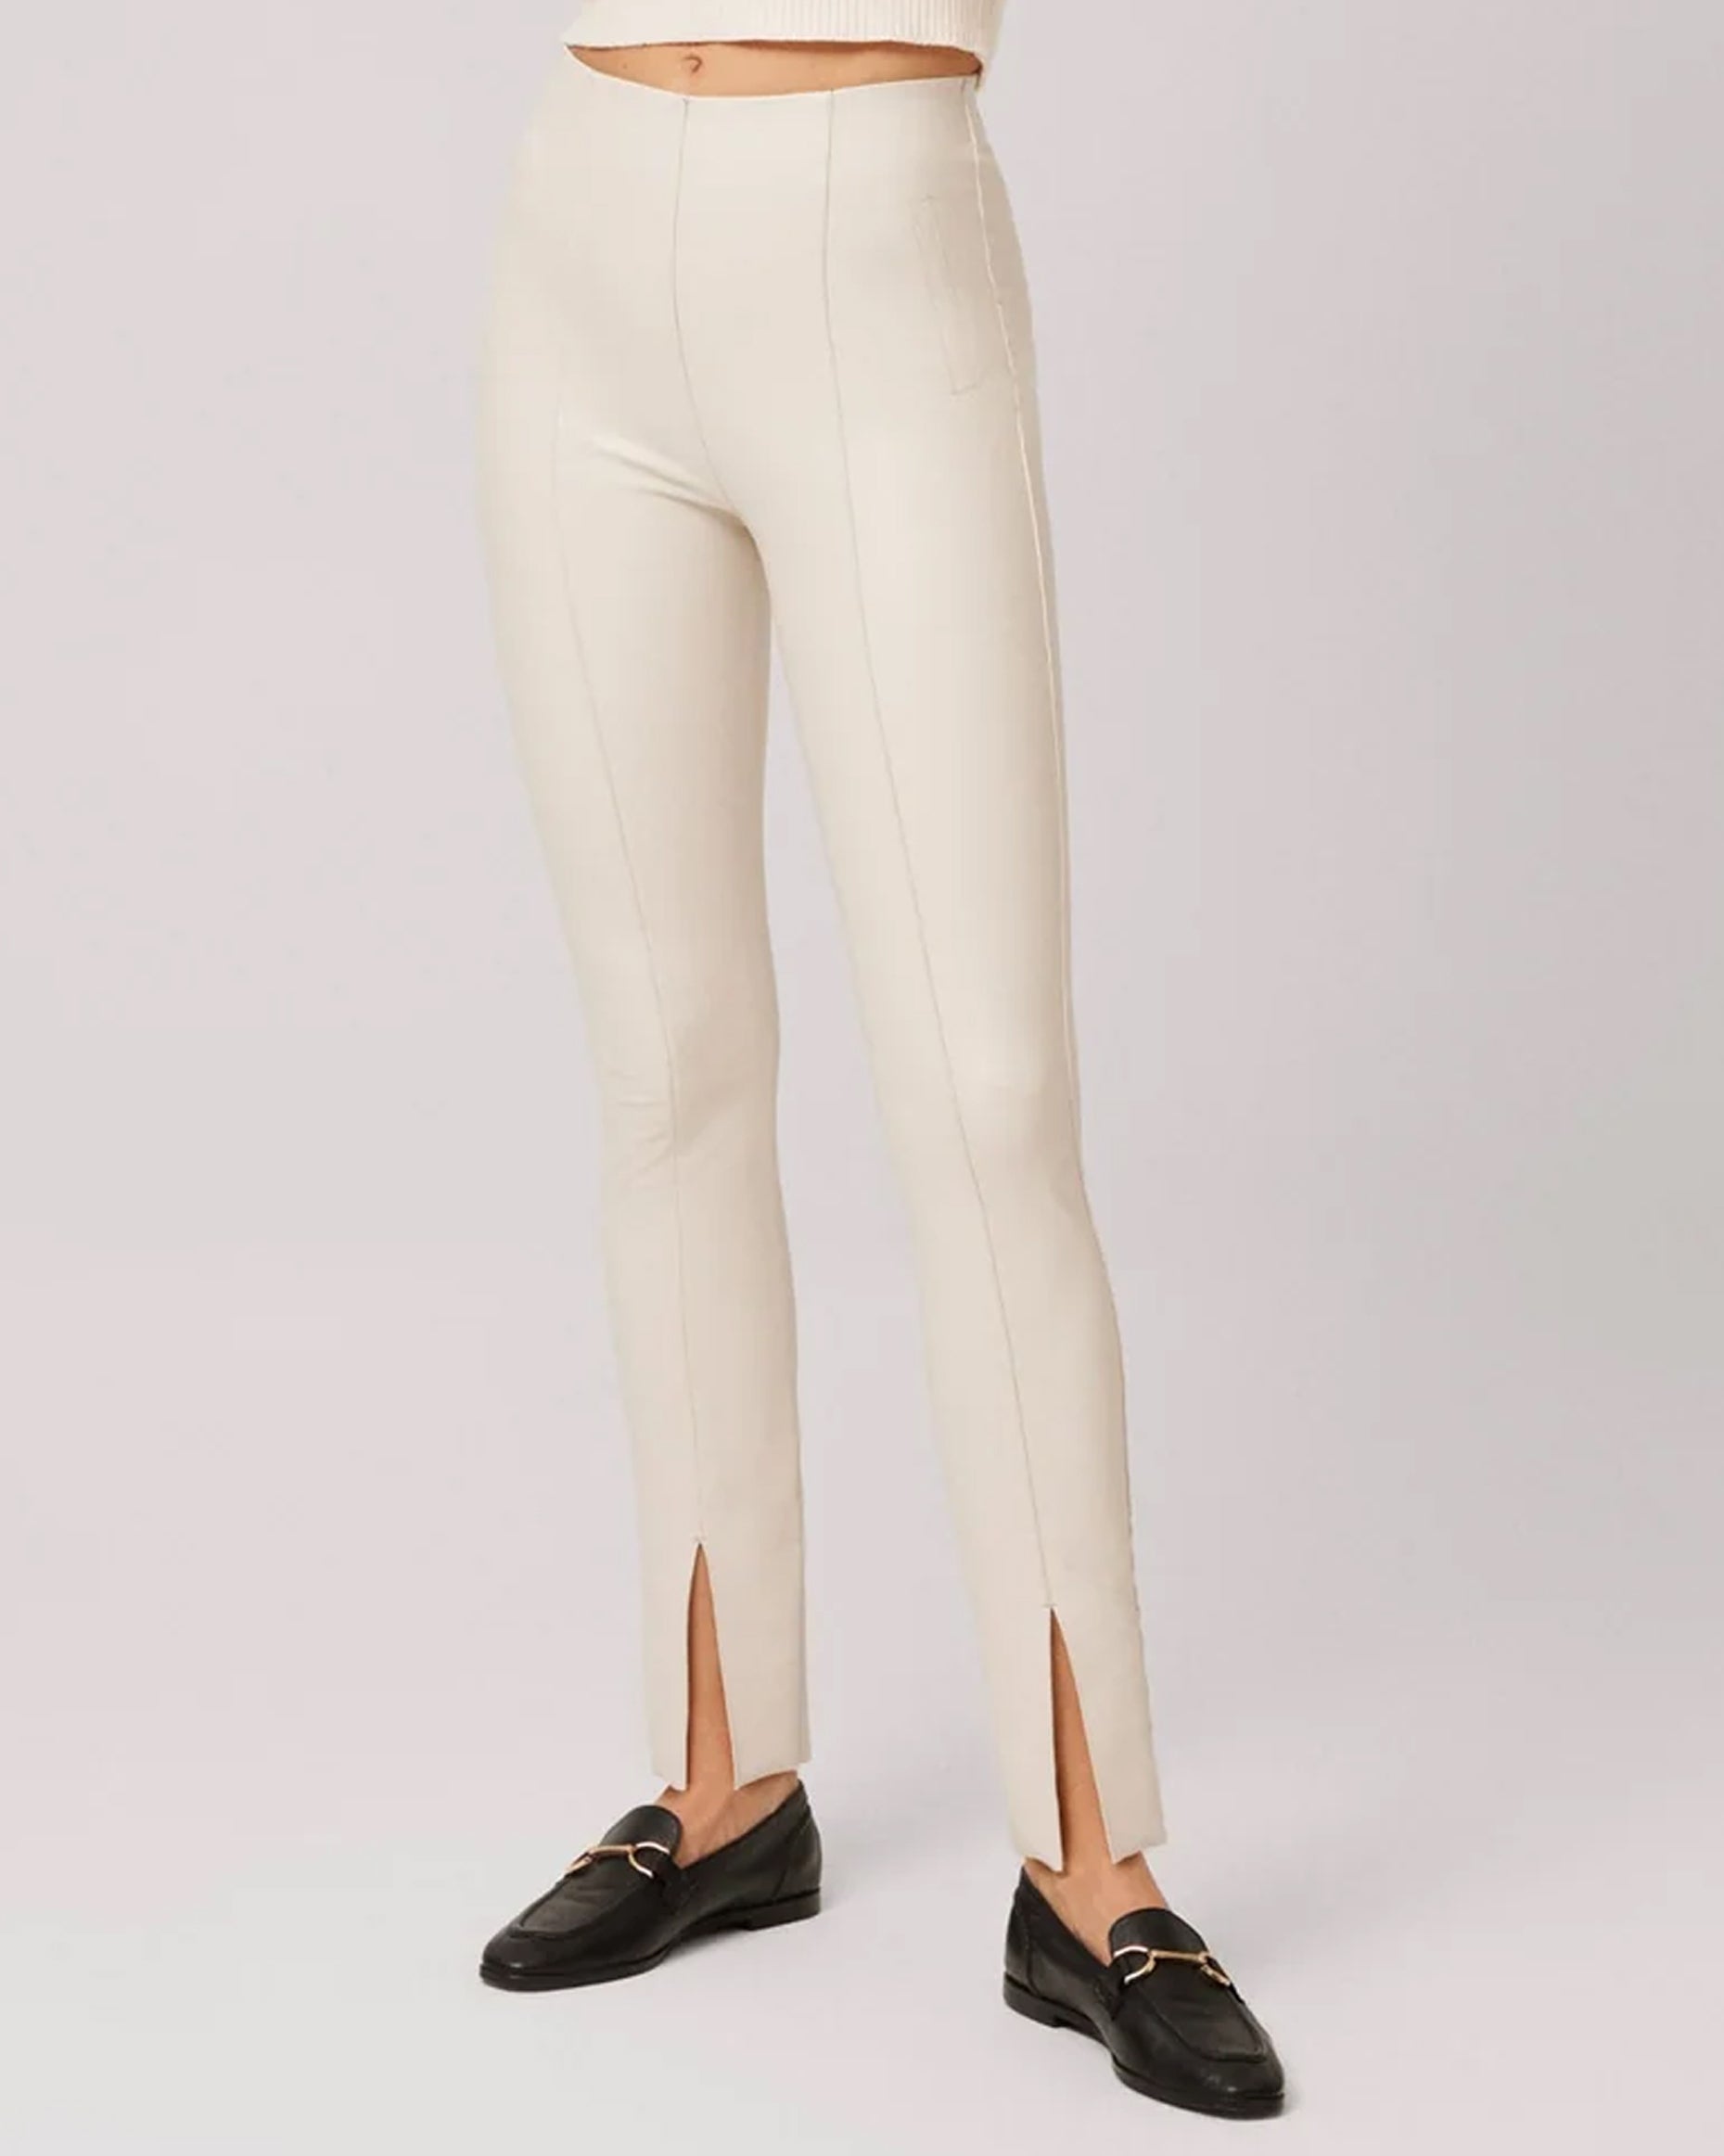 Ysabel Mora 70295 Faux Leather Slit Leggings - Tight fit faux leather thermal cream coloured leggings with a warm plush fleece lining, faux side pocket stitching, centre seam down the front of the leg with a slit opening at the cuff, worn with black loafers.